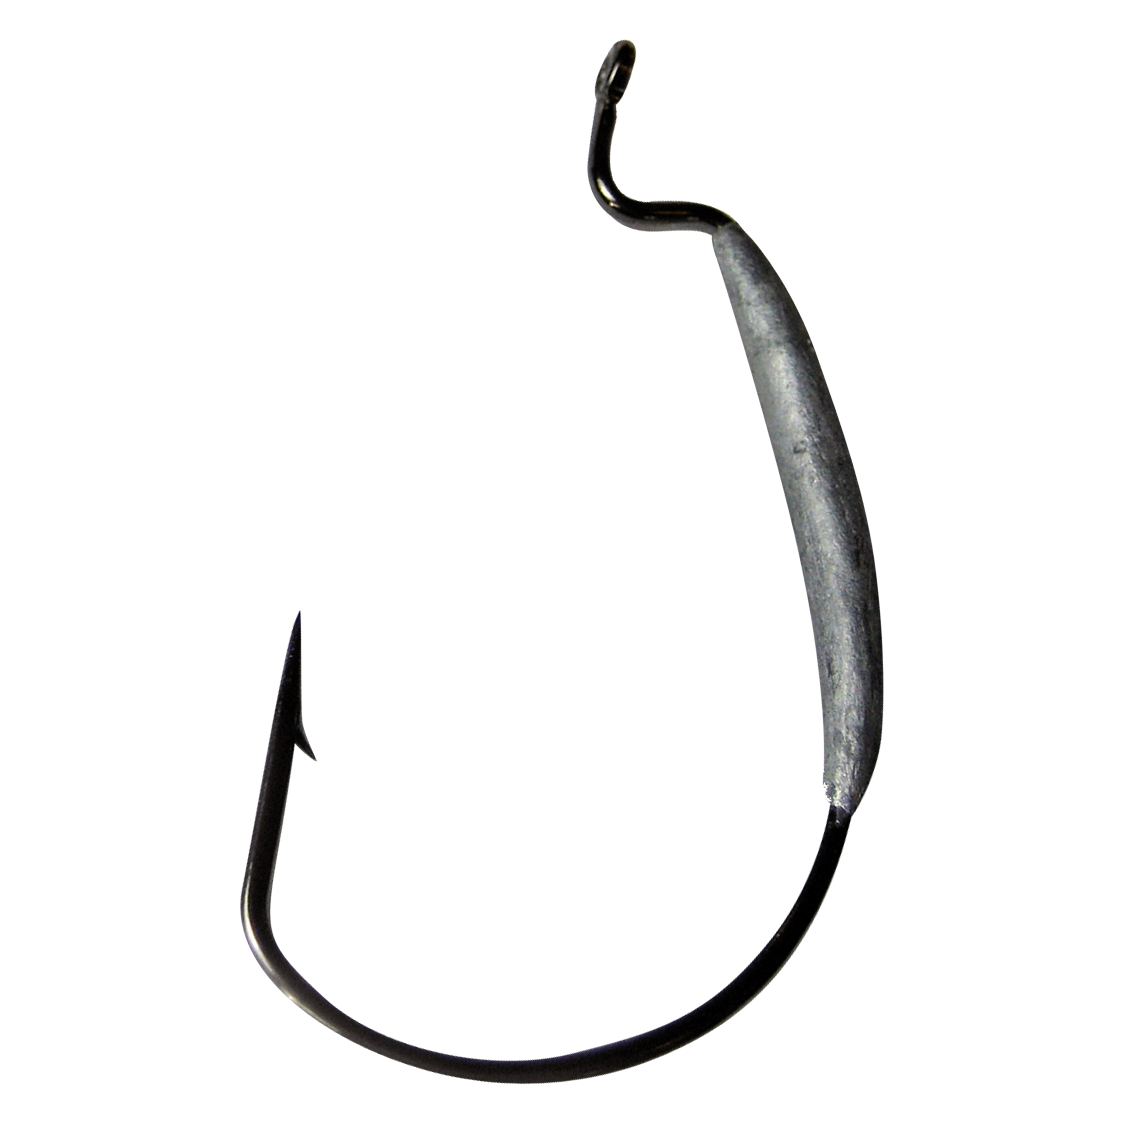 Behr Jig Hook Special VMC at low prices